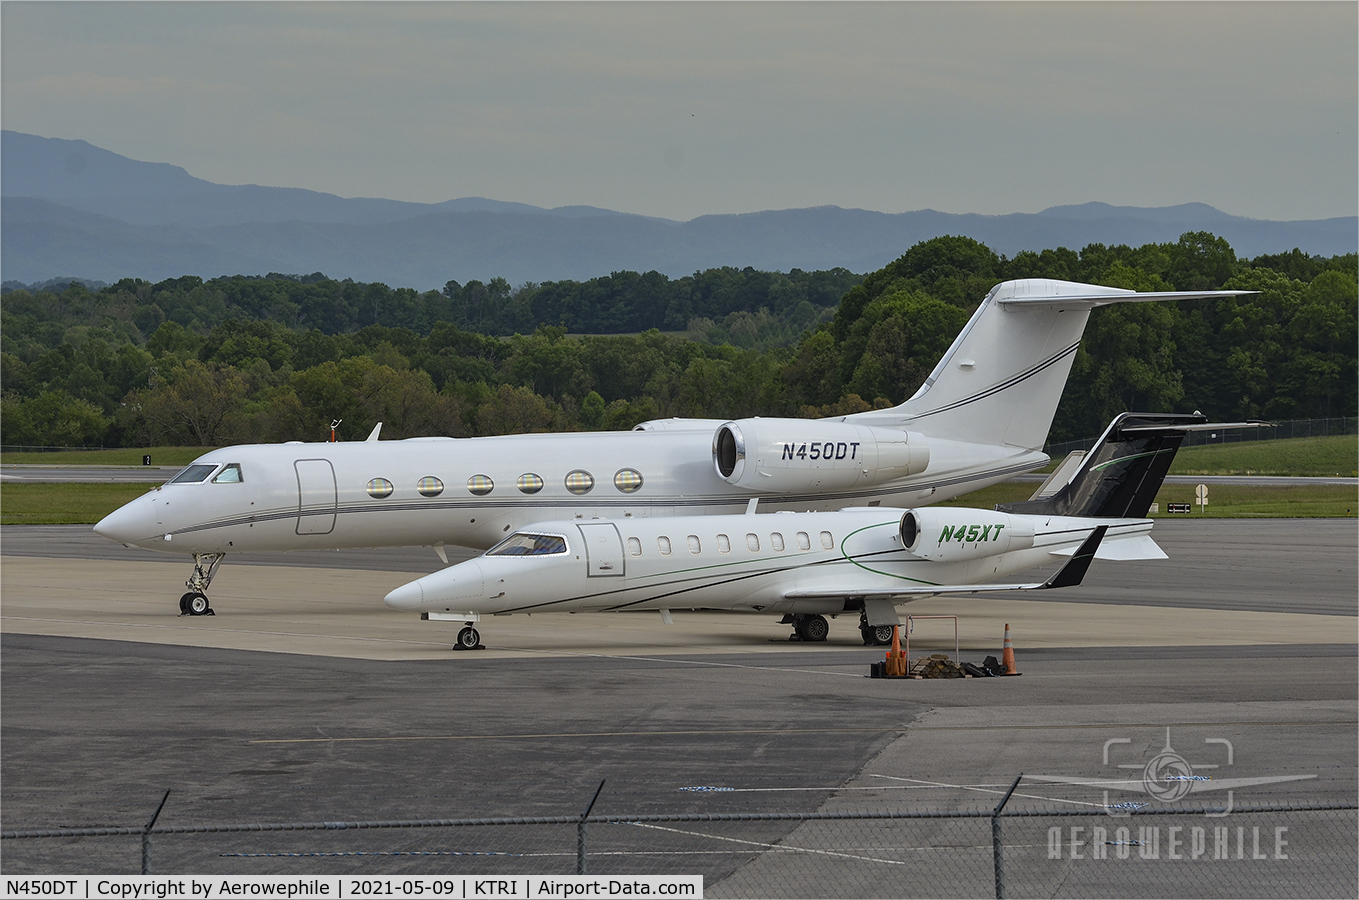 N450DT, 2004 Gulfstream Aerospace GIV-X (G450) C/N 4004, Parked at Tri-Cities Airport (KTRI)
09May21